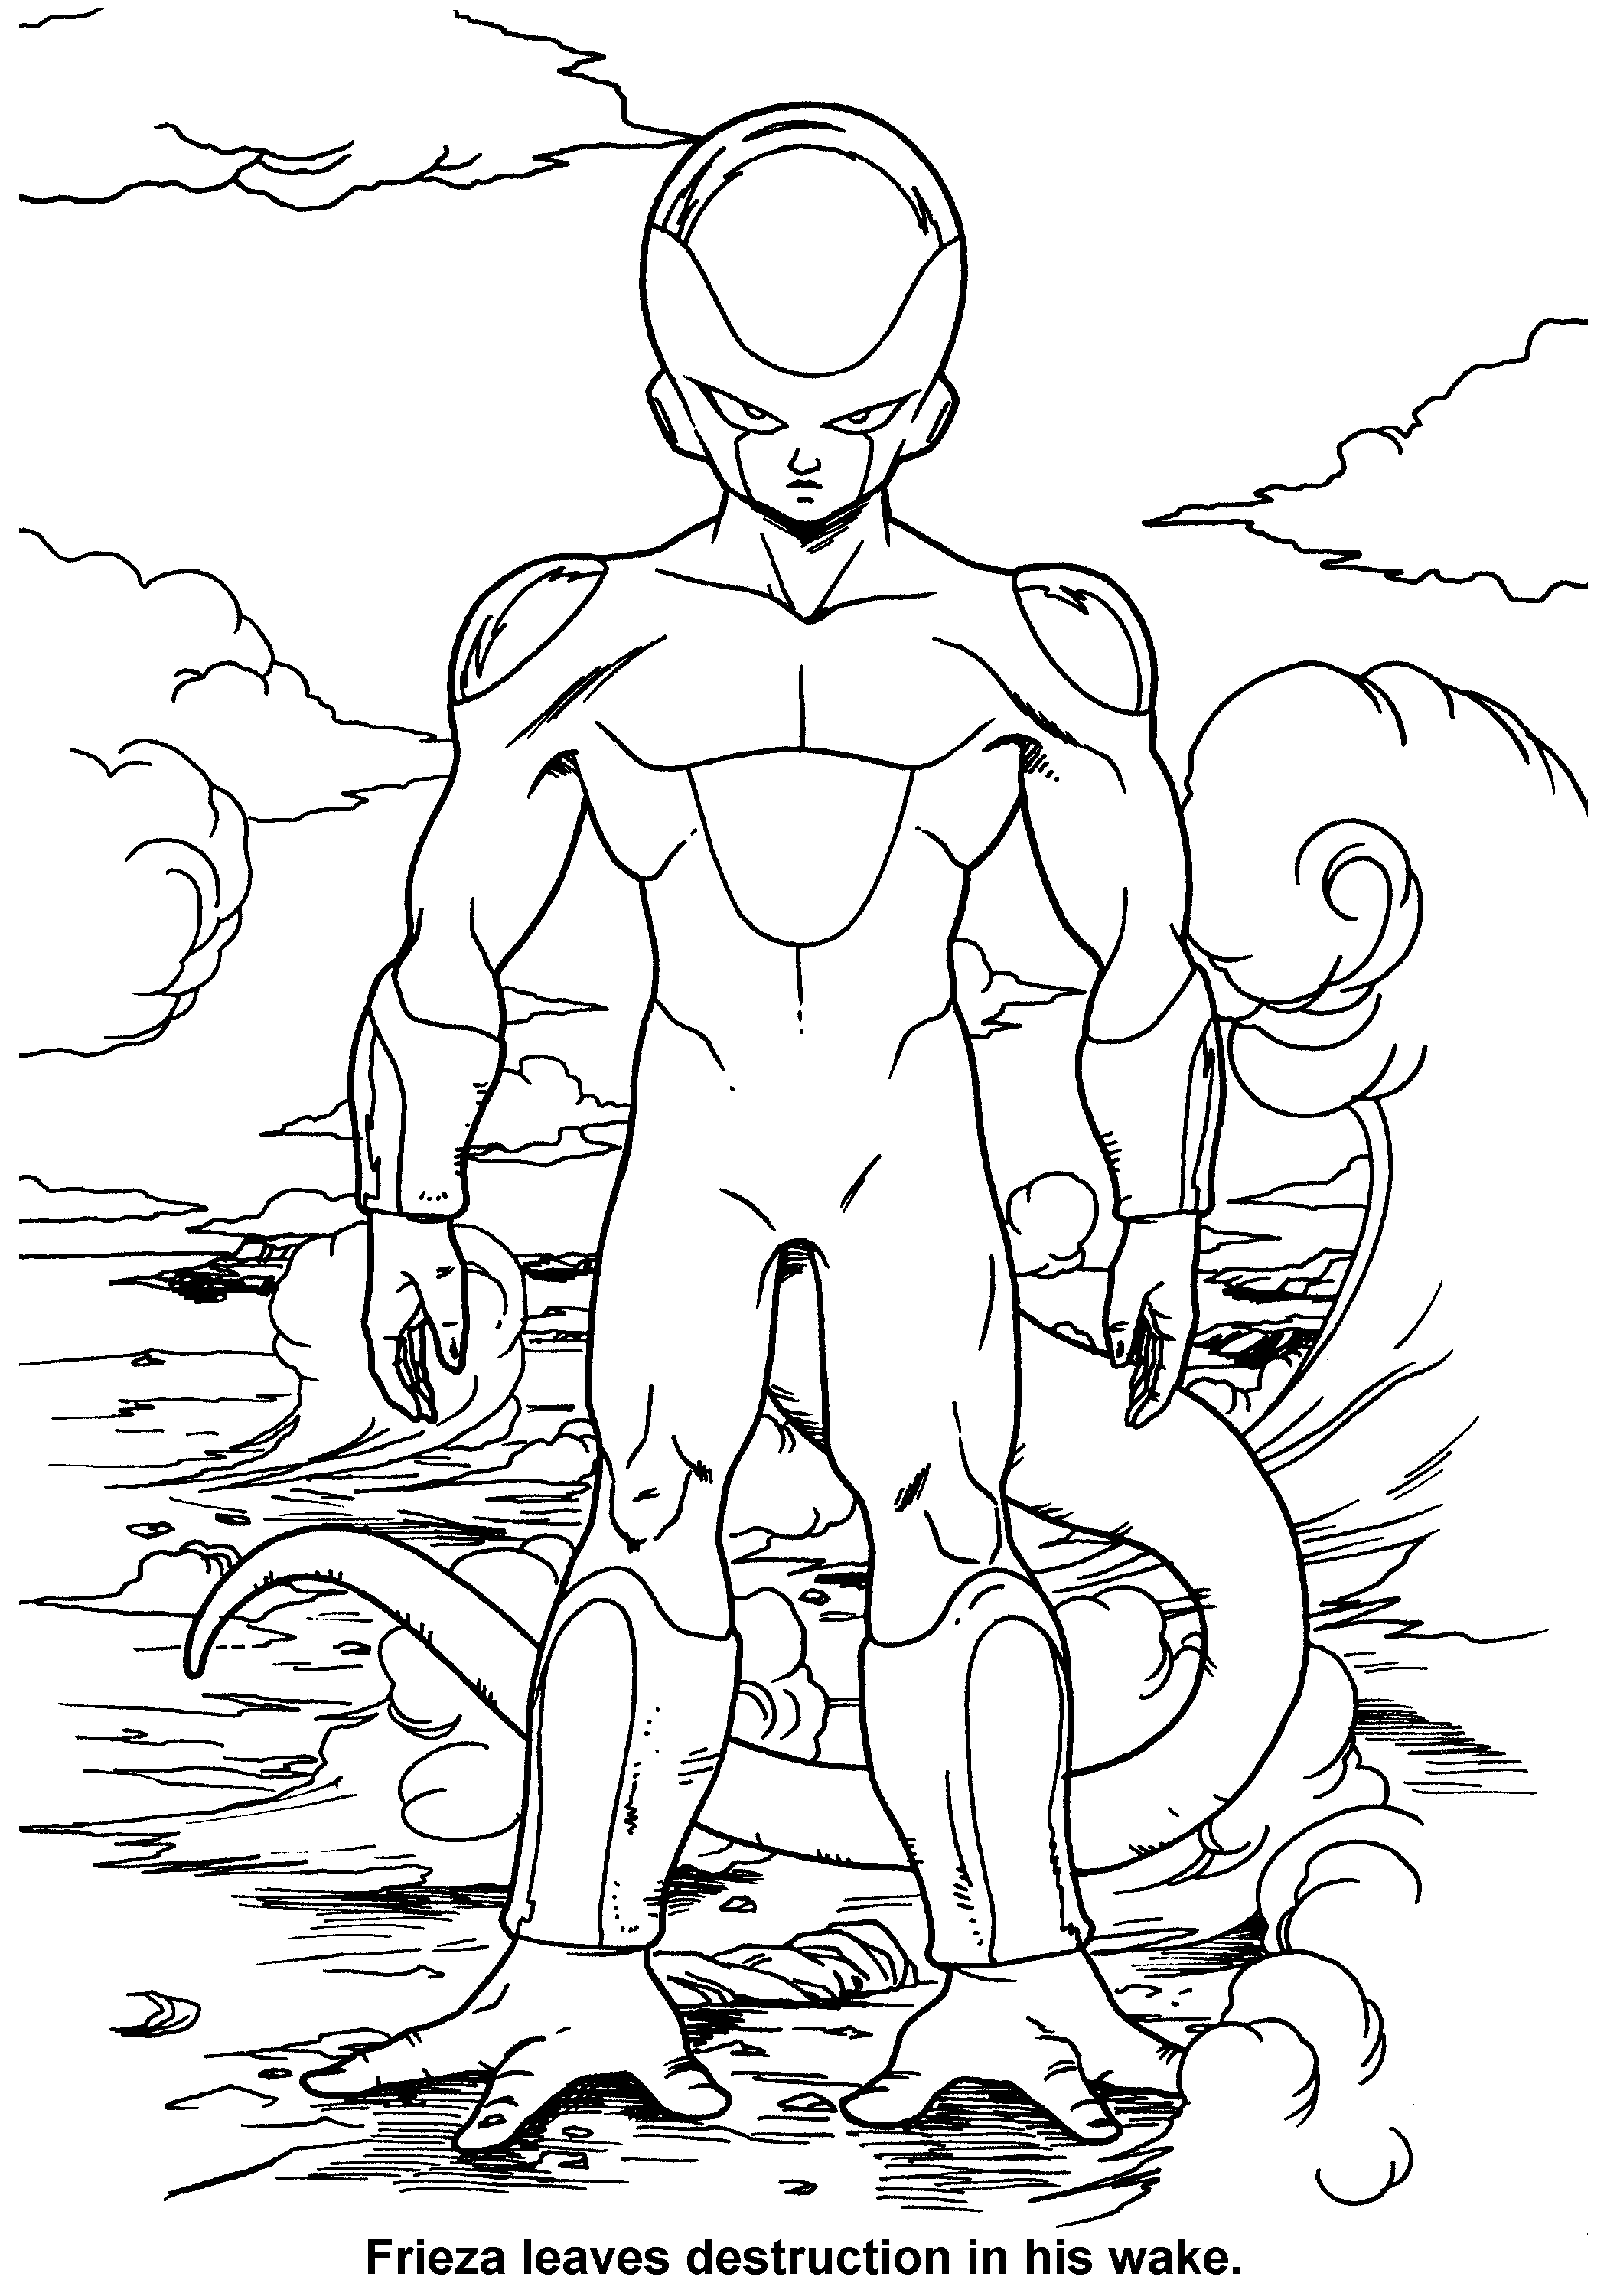 Dragon Ball Z Coloring Page Tv Series Coloring Page | PicGifs.com